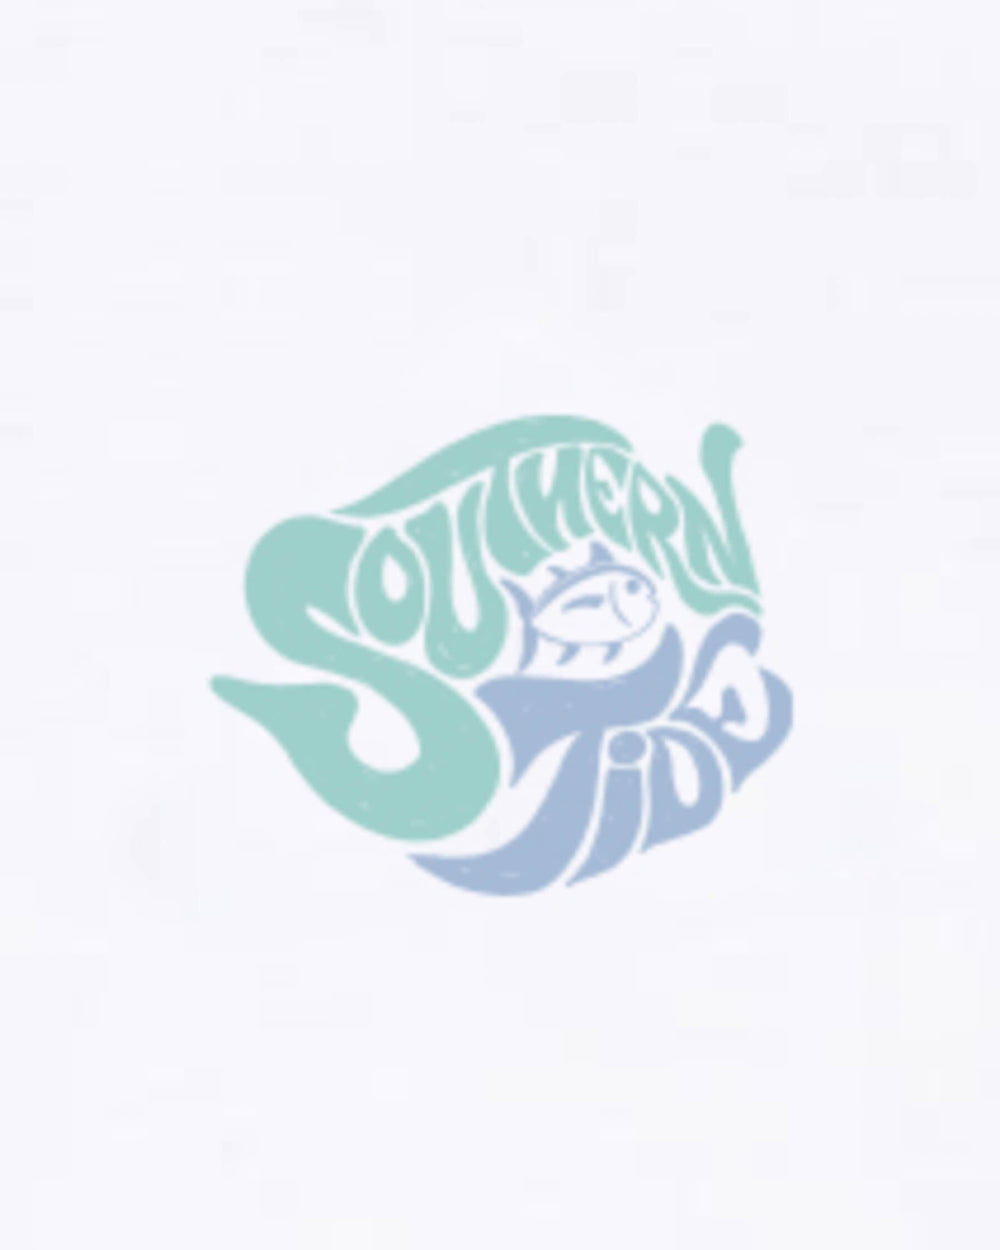 The detail view of the Southern Tide Groovy Southern Tide T-shirt by Southern Tide - Classic White